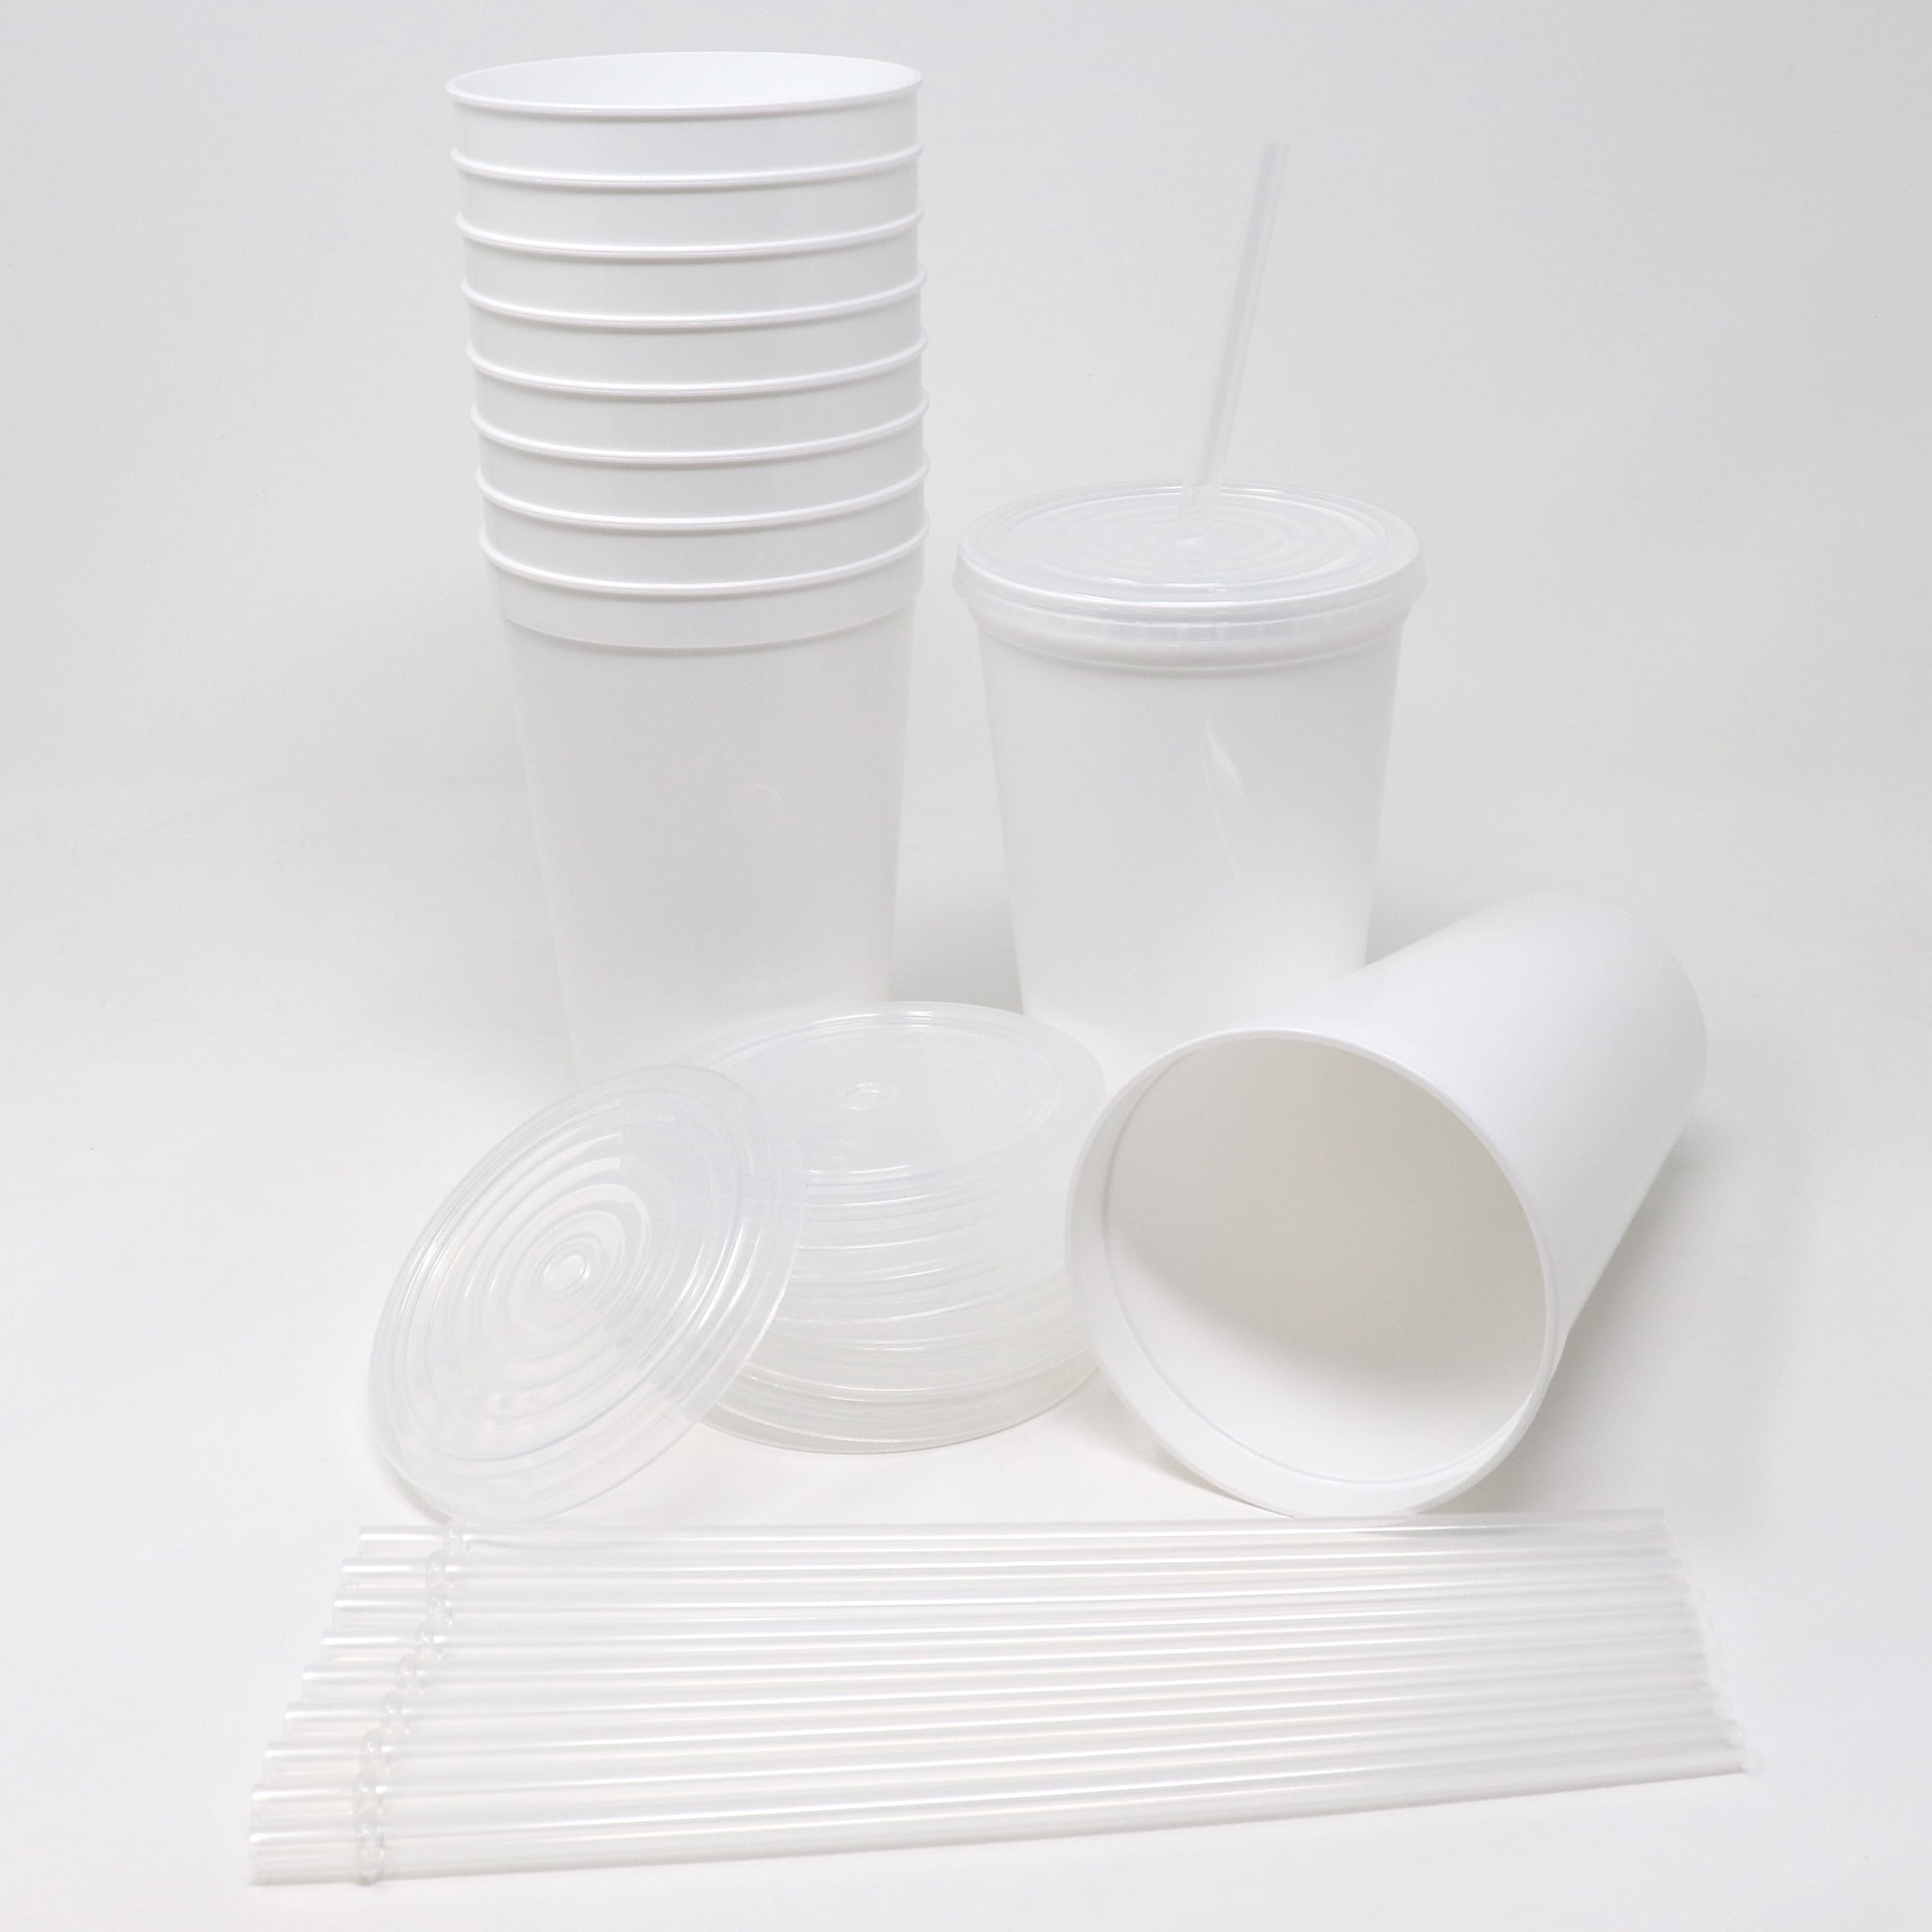 Rolling Sands 16 Oz. Reusable Plastic Stadium Cups with Lids, 6 Pack, USA  Made Tumblers and Lids, In…See more Rolling Sands 16 Oz. Reusable Plastic